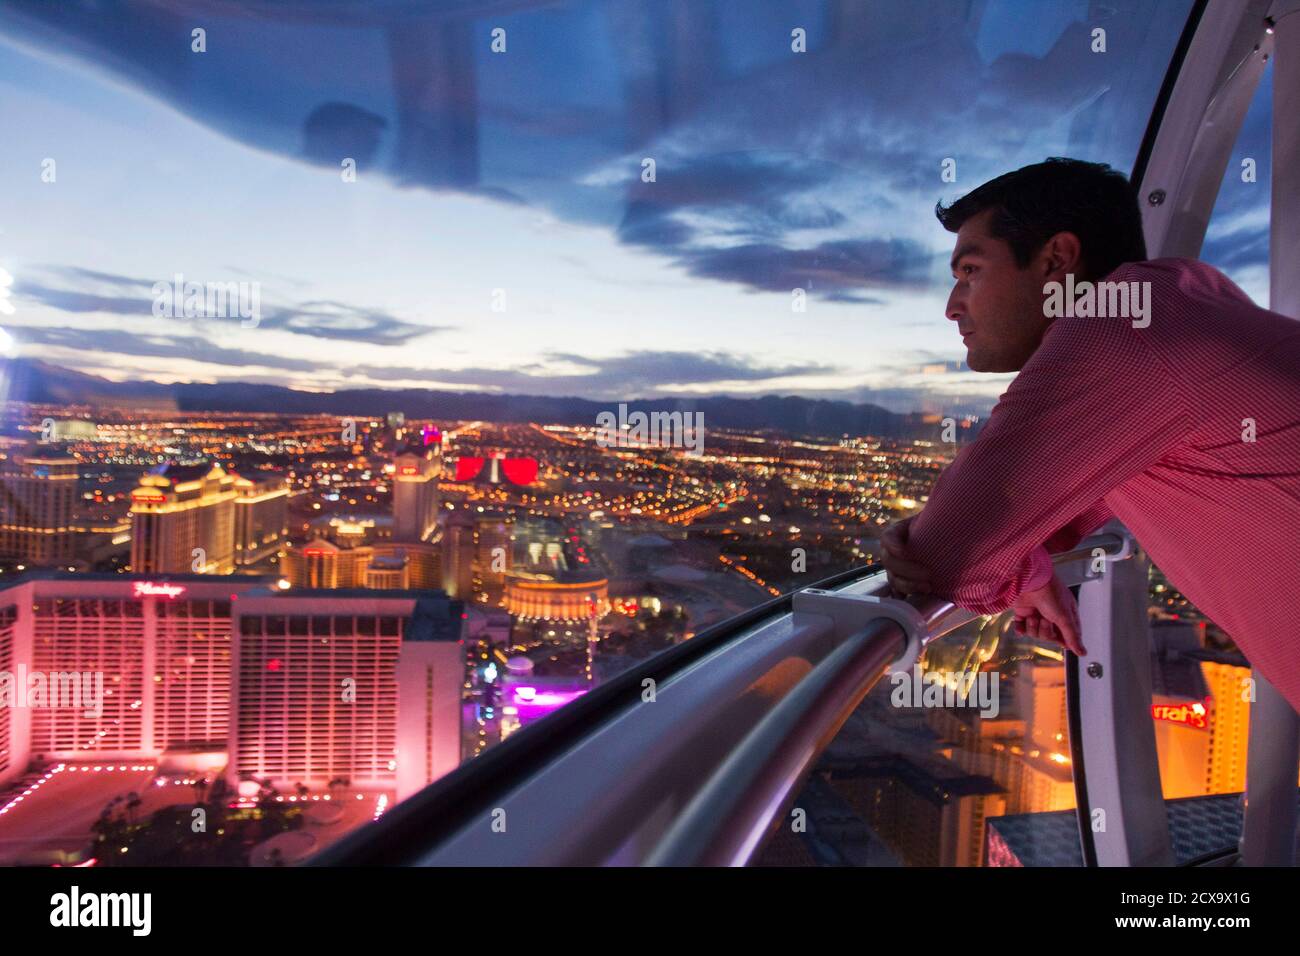 Alejandro Higuera of Mexico rides the 550 foot-tall (167.6 m) High Roller observation wheel, the tallest in the world, in Las Vegas, Nevada April 9, 2014. The wheel is the centerpiece of the $550 million Linq project, a retail, dining and entertainment district by Caesars Entertainment Corp. REUTERS/Las Vegas Sun/Steve Marcus (UNITED STATES - Tags: TRAVEL BUSINESS SOCIETY CITYSCAPE) Stock Photo